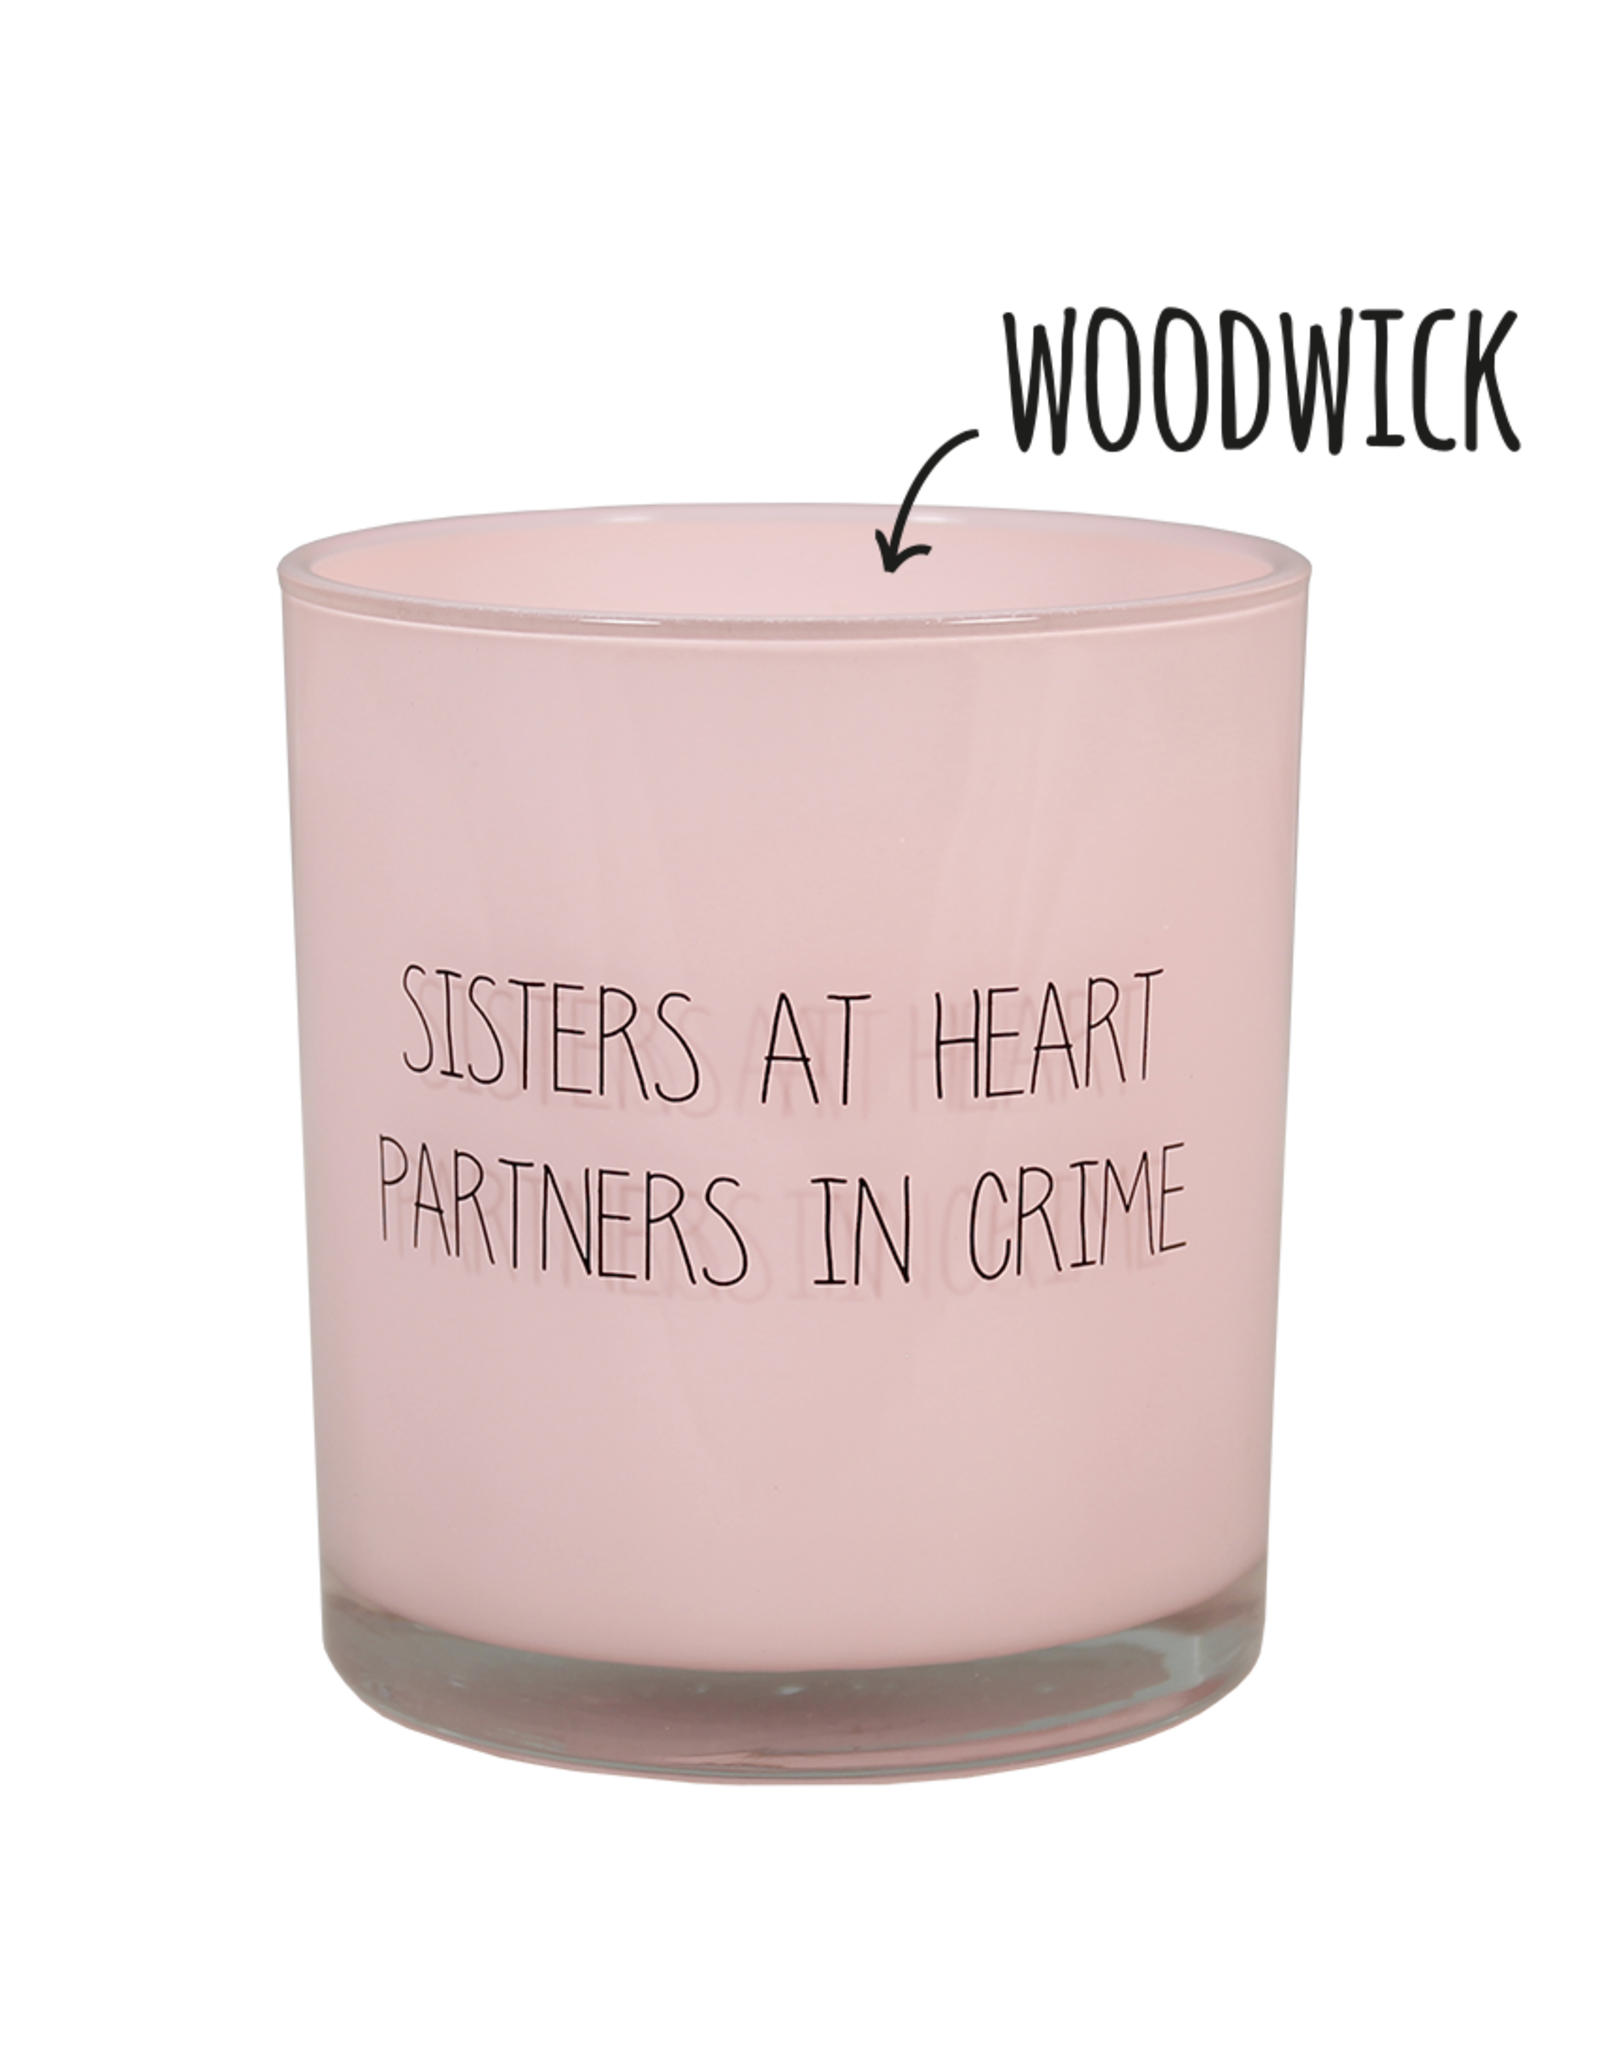 My flame Lifestyle SOJAKAARS |SISTERS AT HEART PARTNERS IN CRIME | GEUR: GREEN TEA TIME